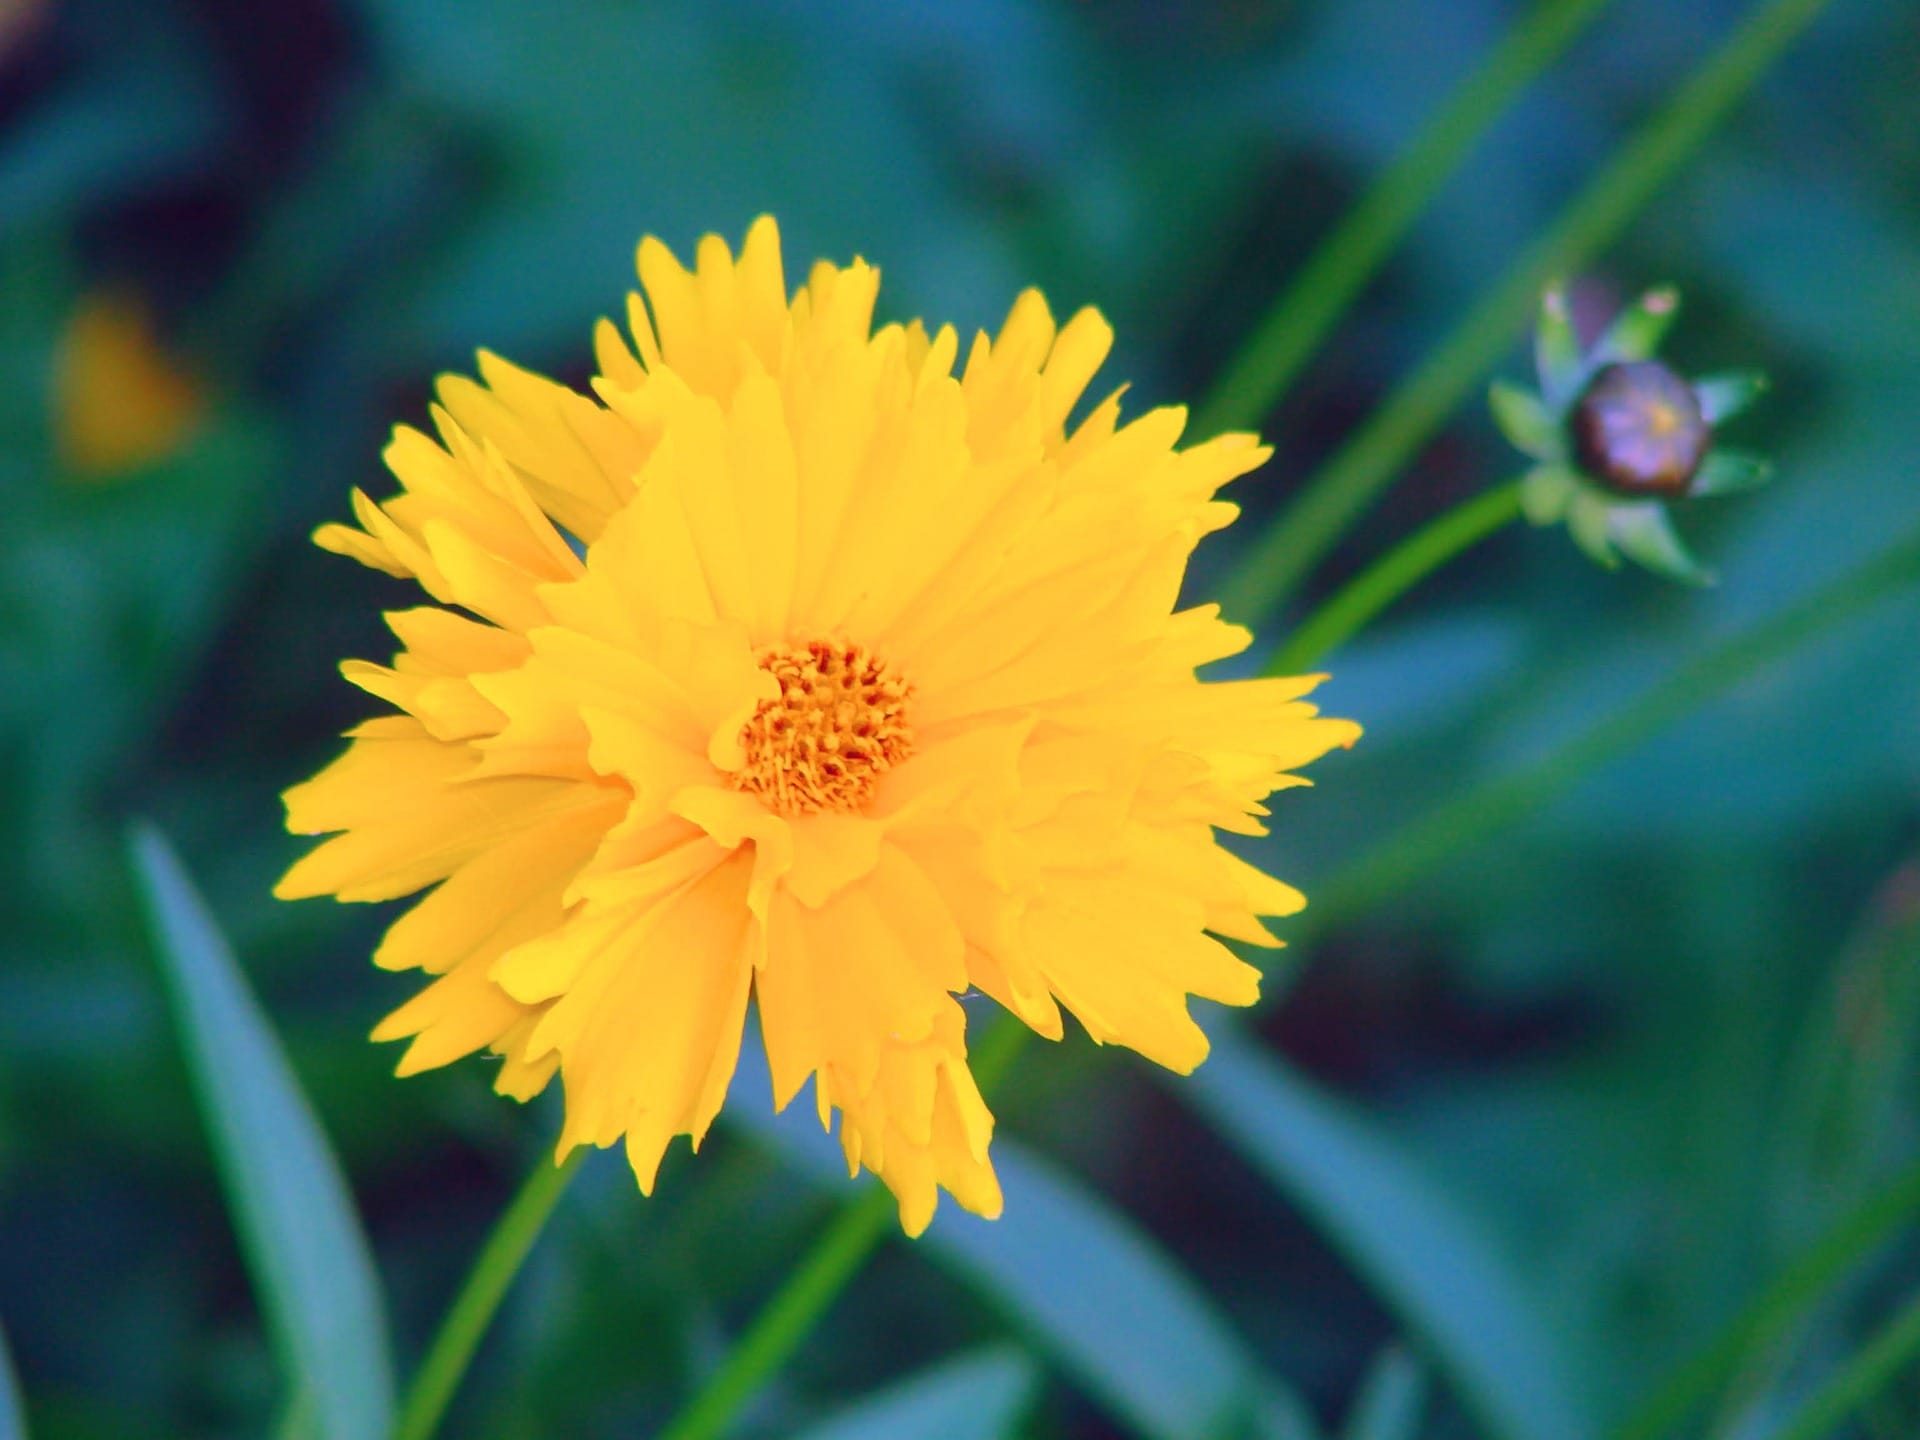 Lance leafed coreopsis: bright yellow flowers with feathered edges